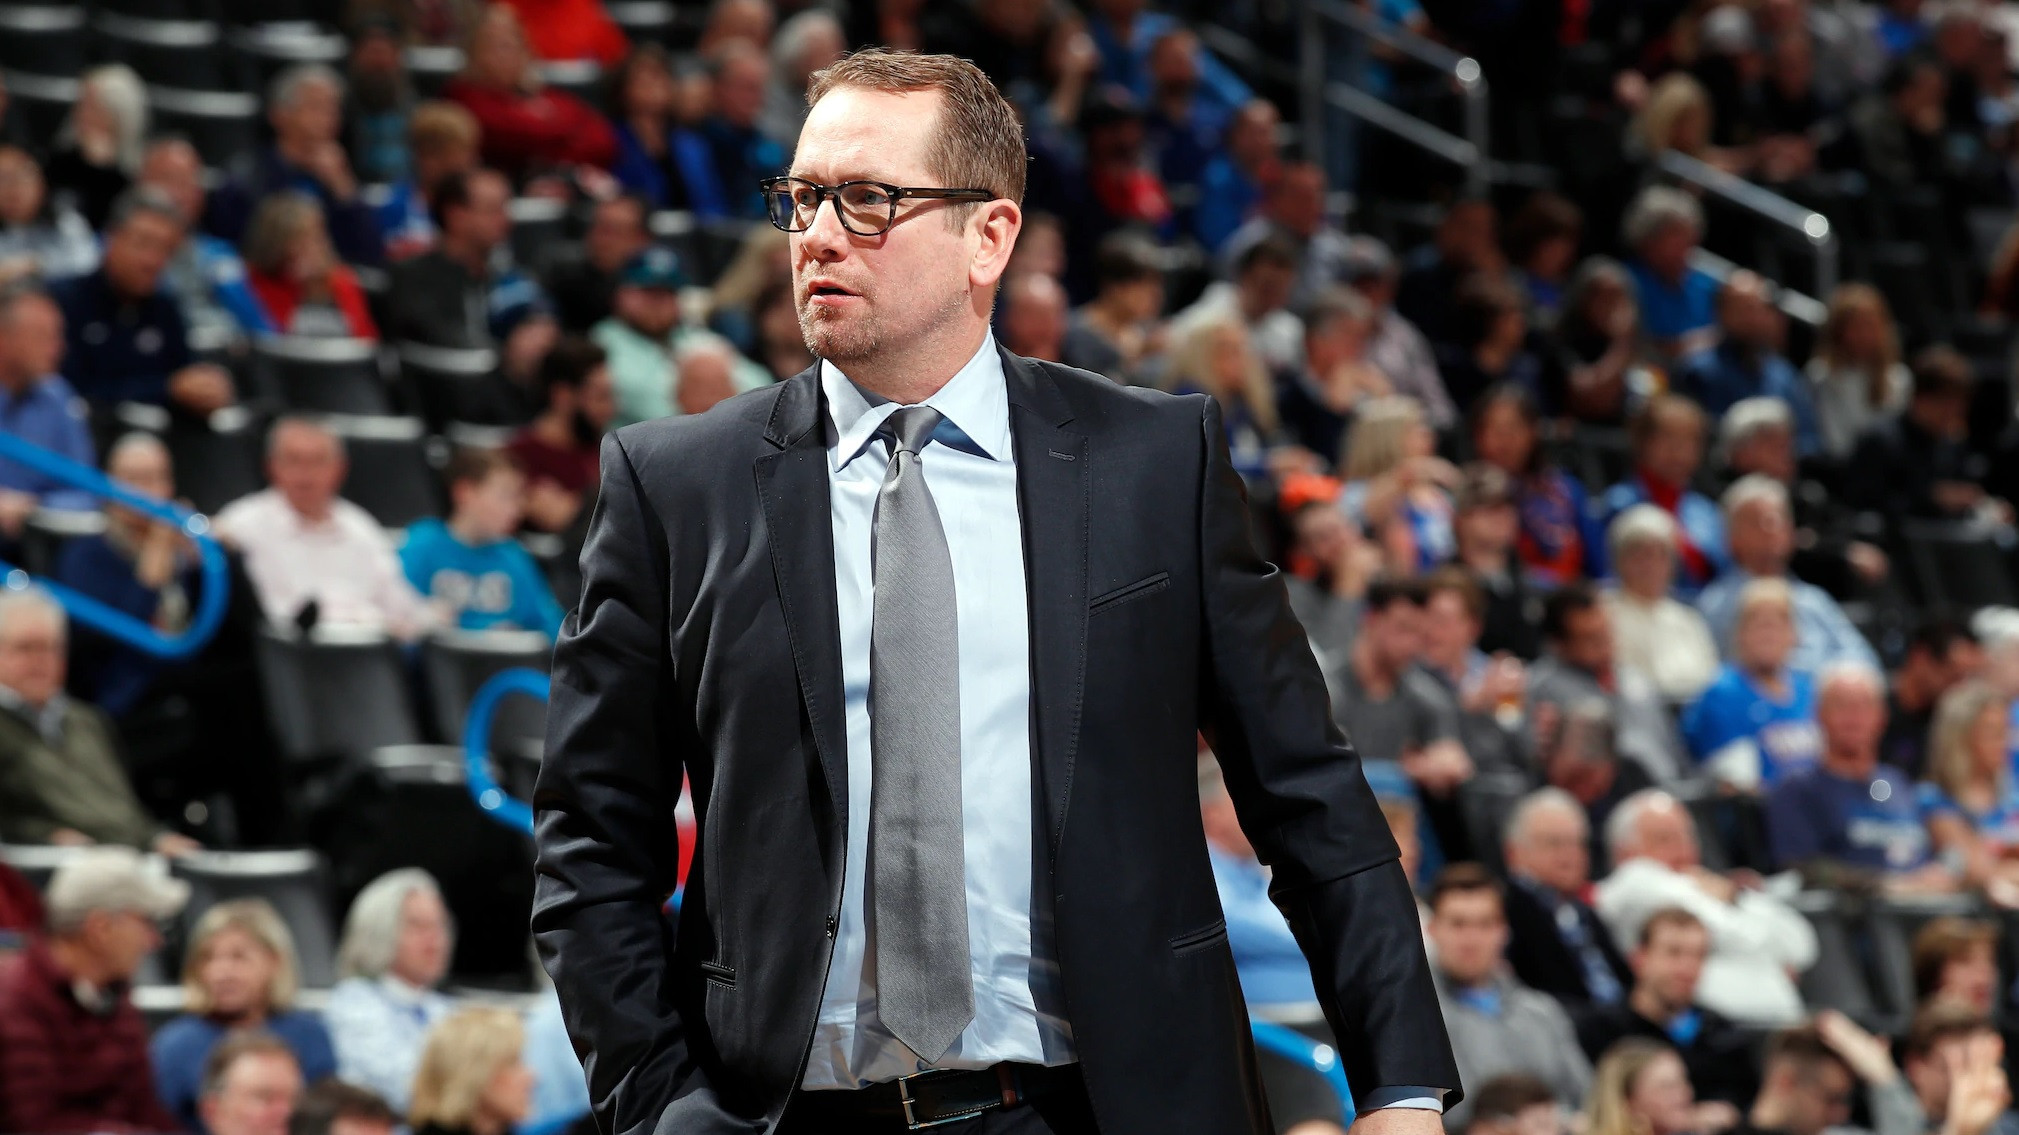 Toronto Raptors Nick Nurse has been named as the NBA's Coach of the Year for the 2019-2020 season ©NBA